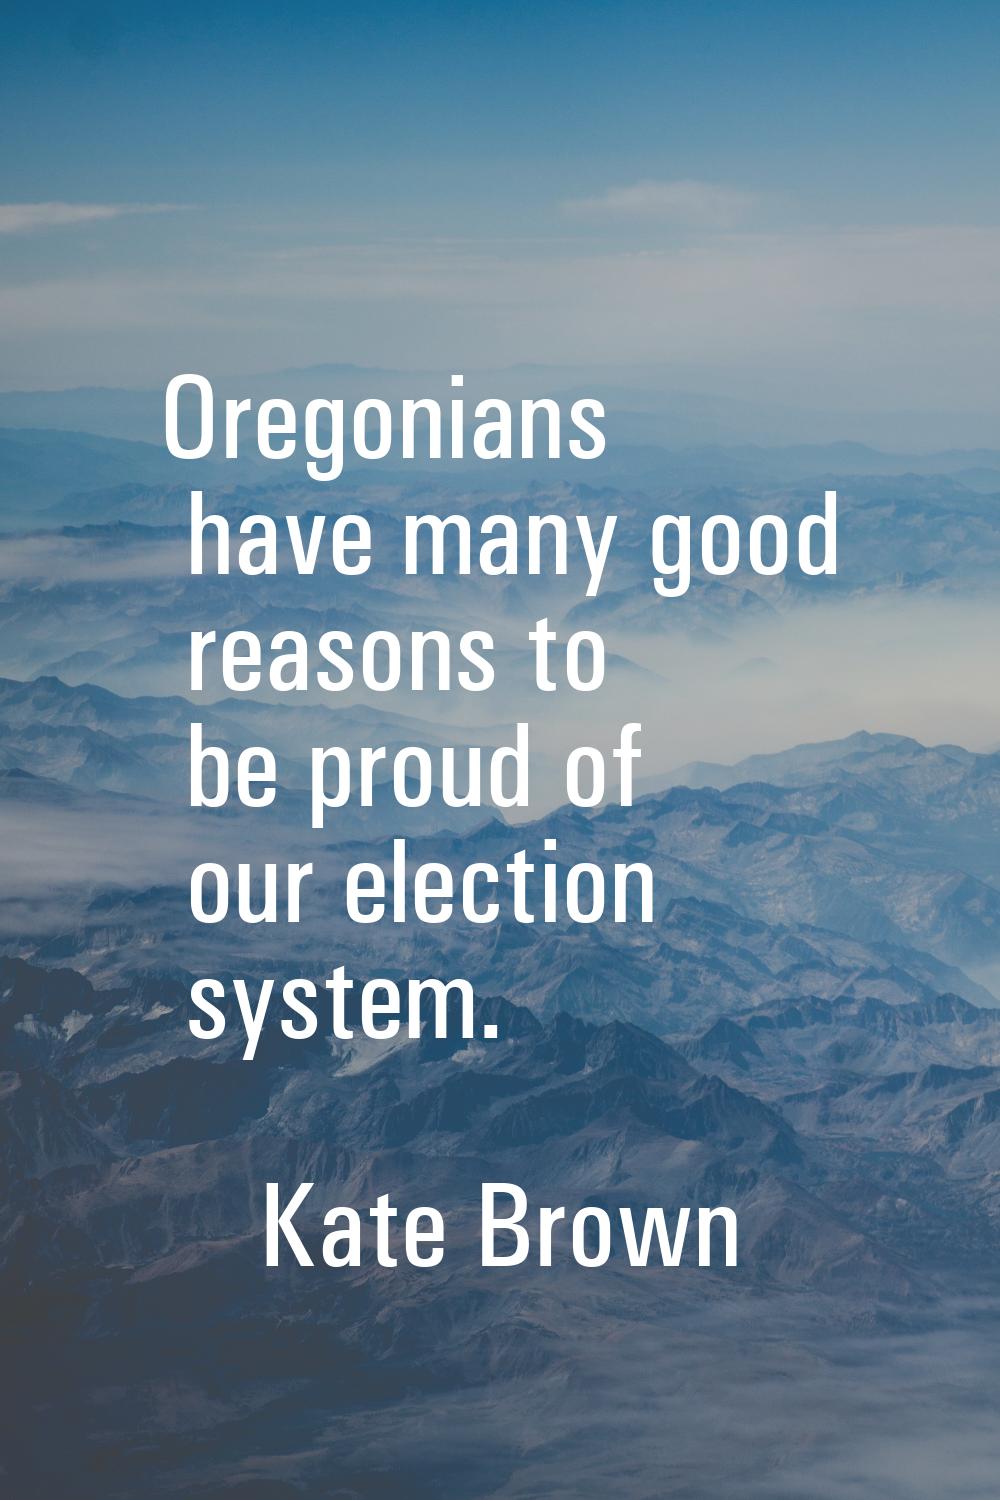 Oregonians have many good reasons to be proud of our election system.